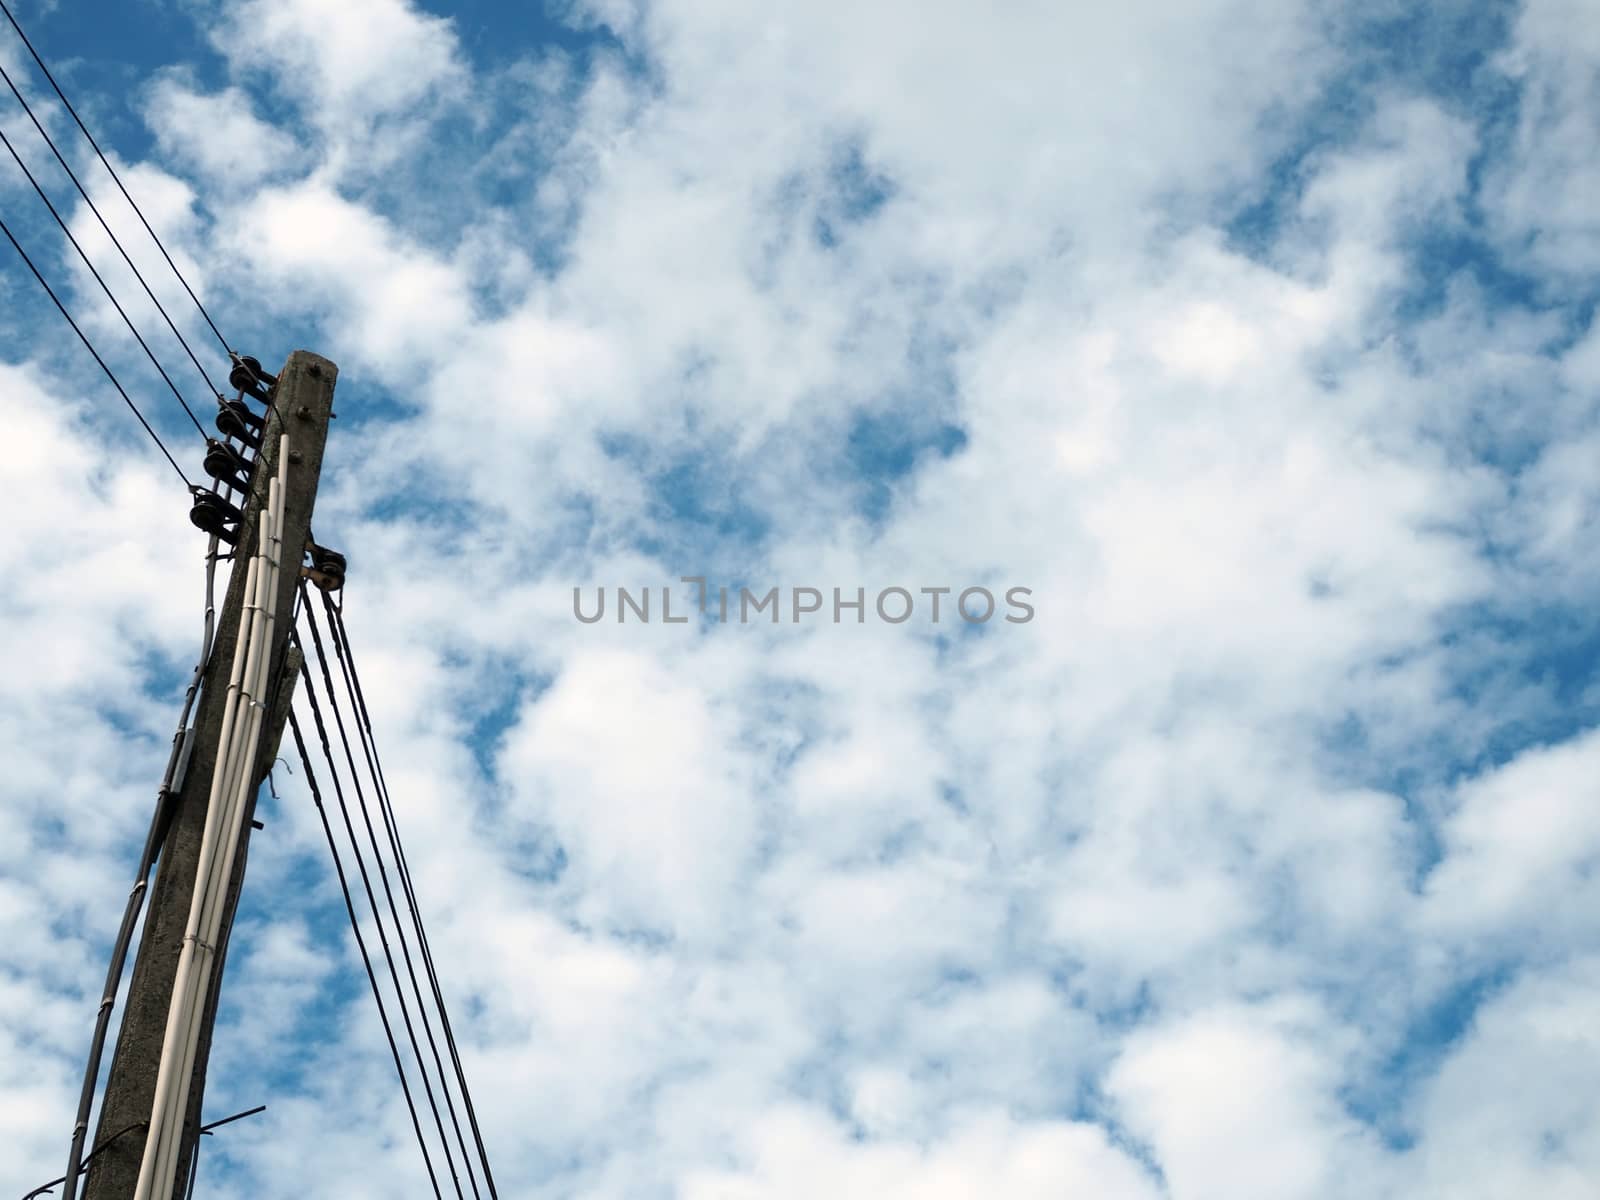 Electric pole and electric wire On the background is an empty blue sky.
Minimal concept